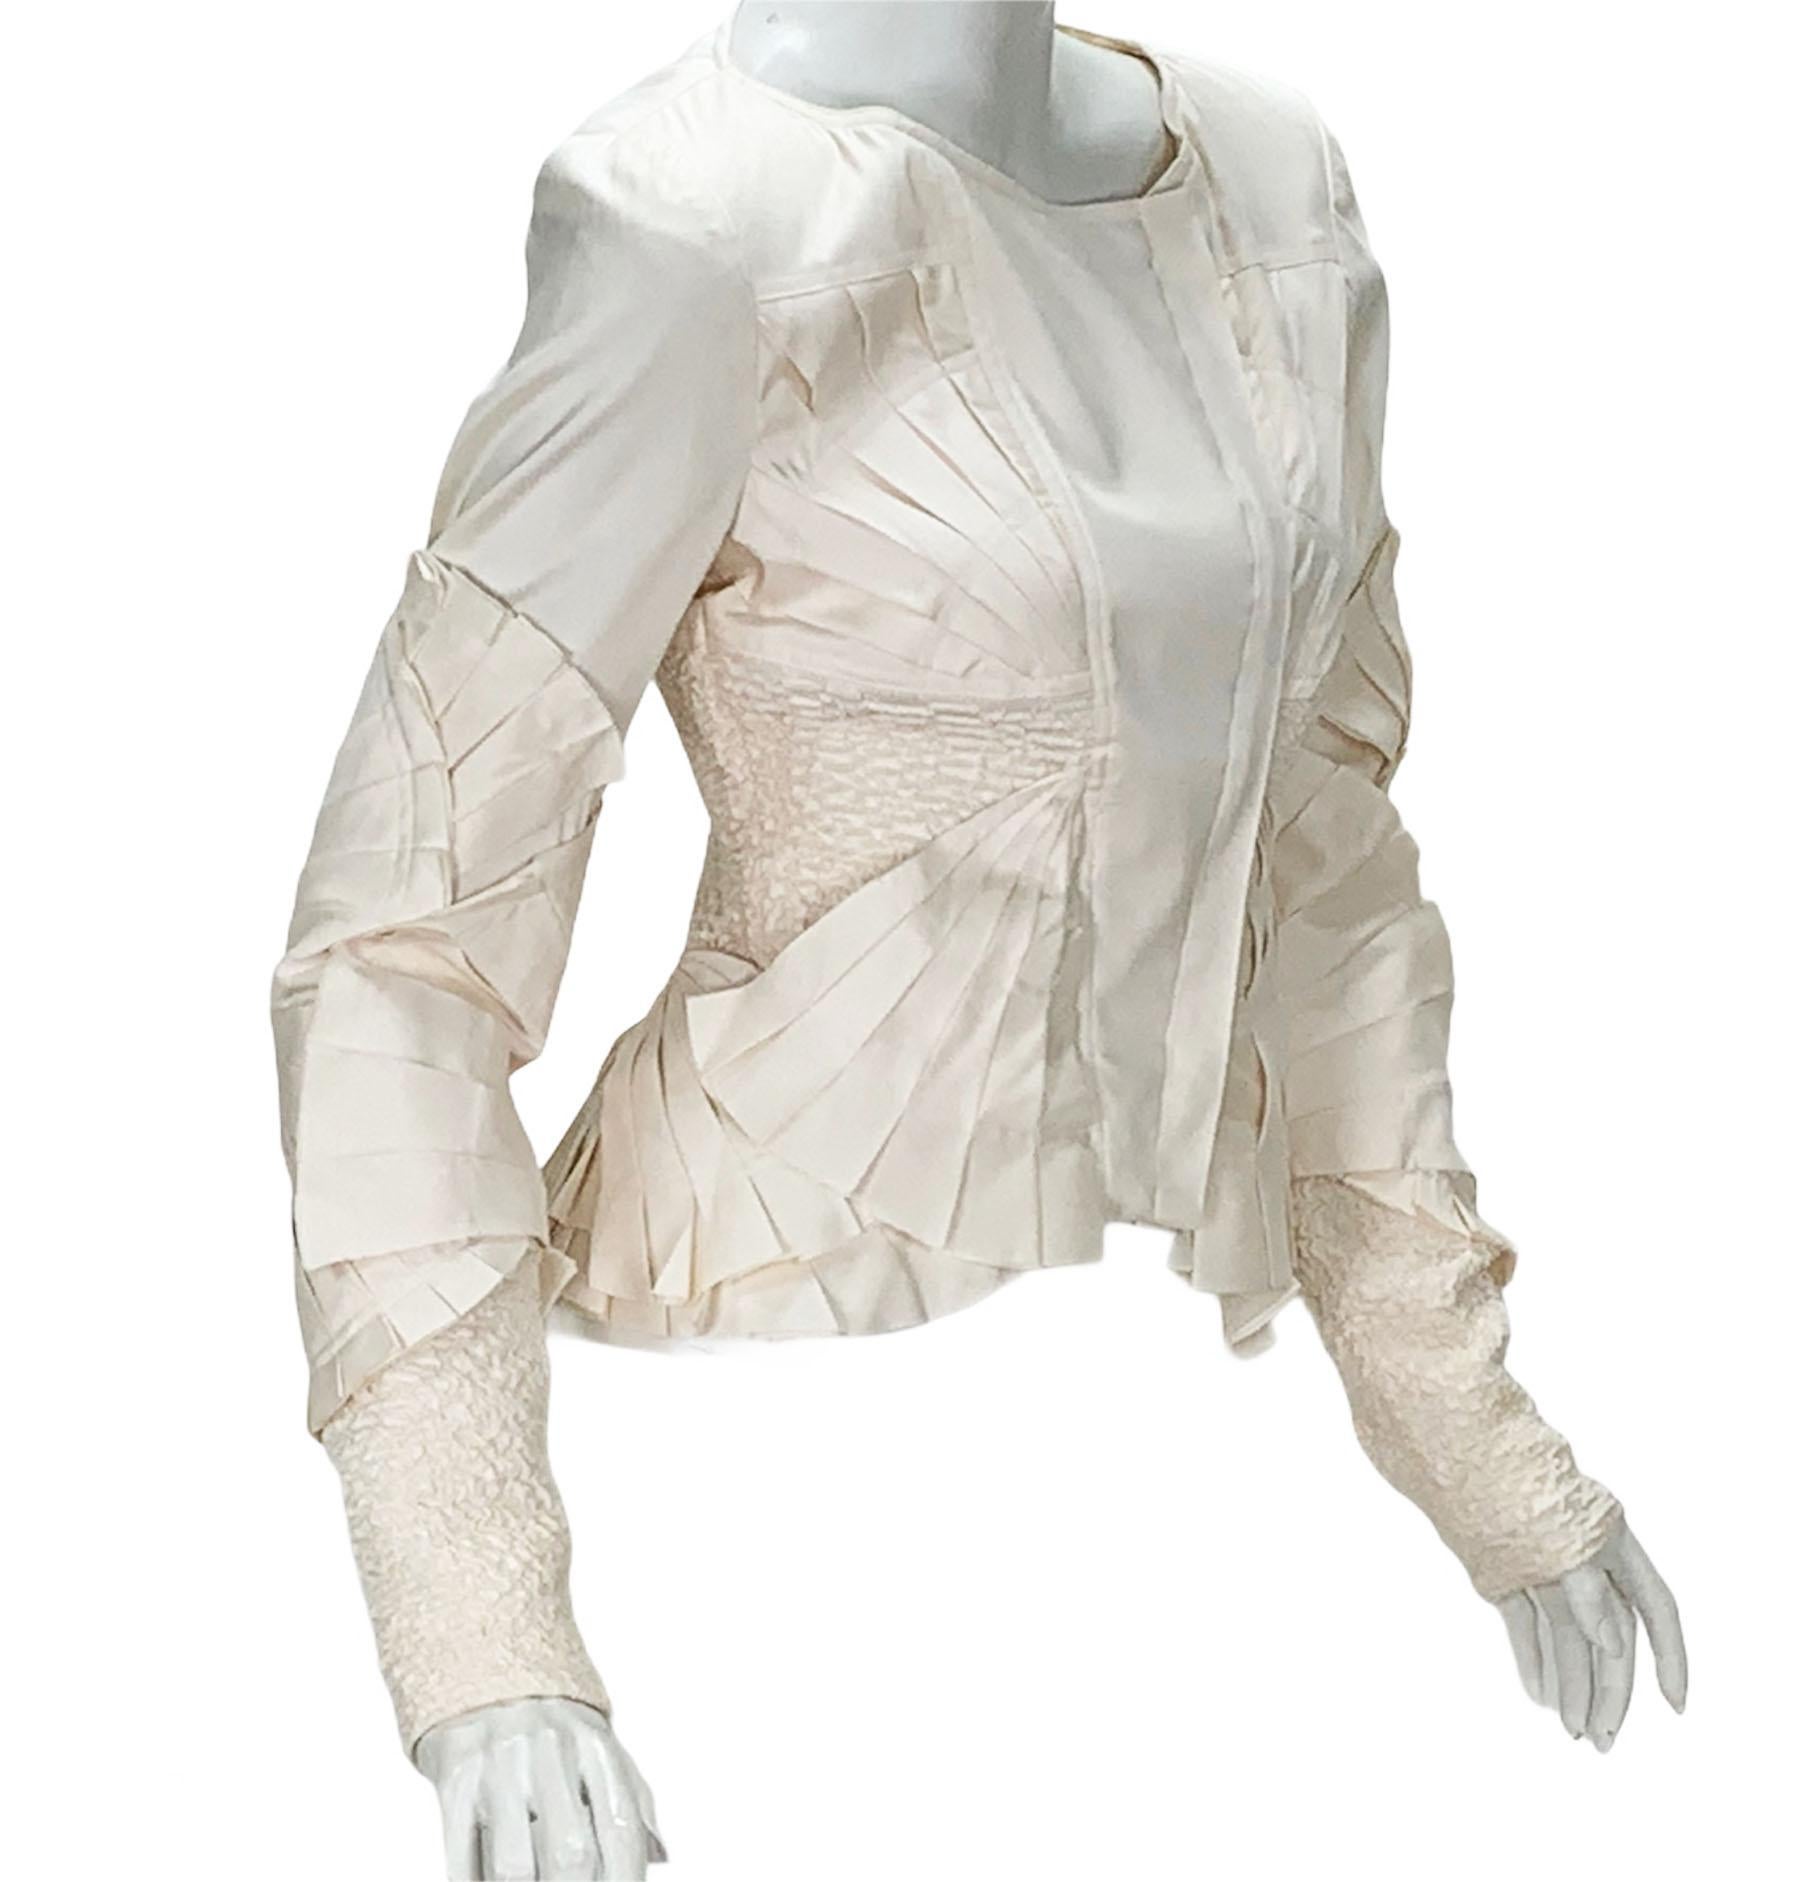 Tom Ford for Gucci S/S 2004 Silk Off-White Color Fan Pleated Jacket It 40 - US 4 For Sale 2